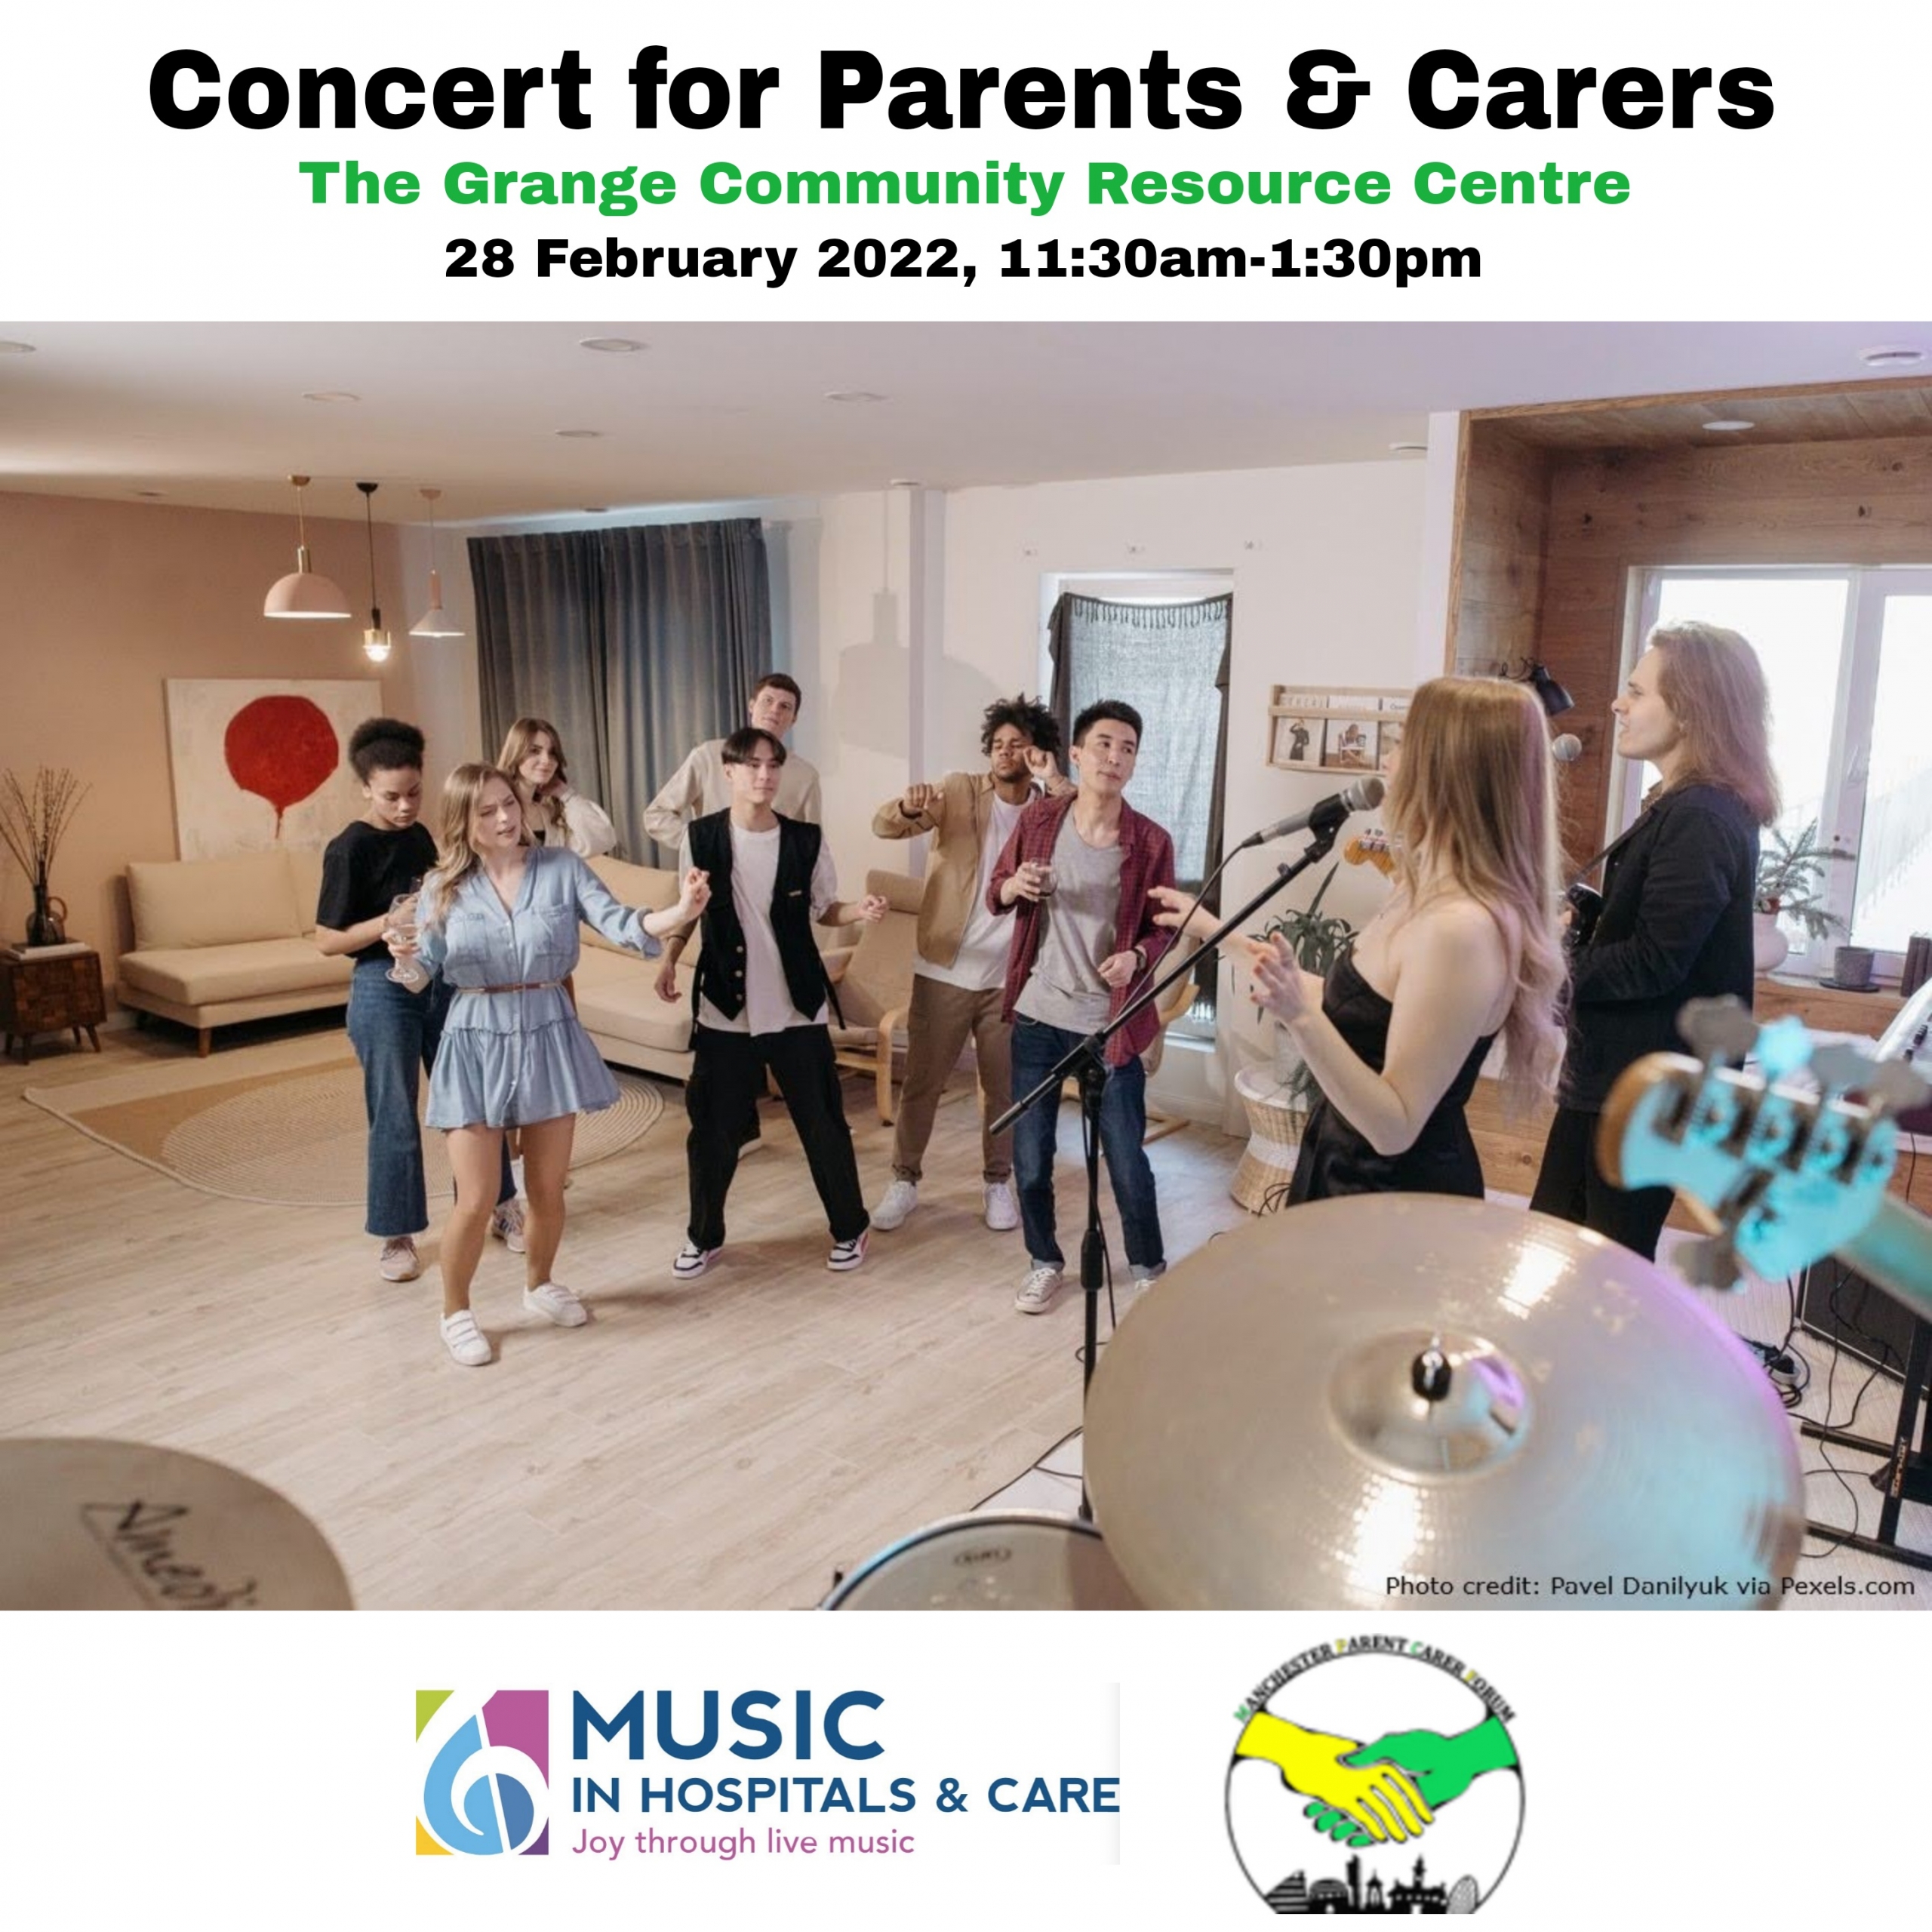 The main photo shows a group of people enjoying a relaxed concert indoors. The top text says "Concert for Parents & Carers", followed by the event details (venue, date, time). The bottom shows MiHC's and MPCF's logos, respectively.